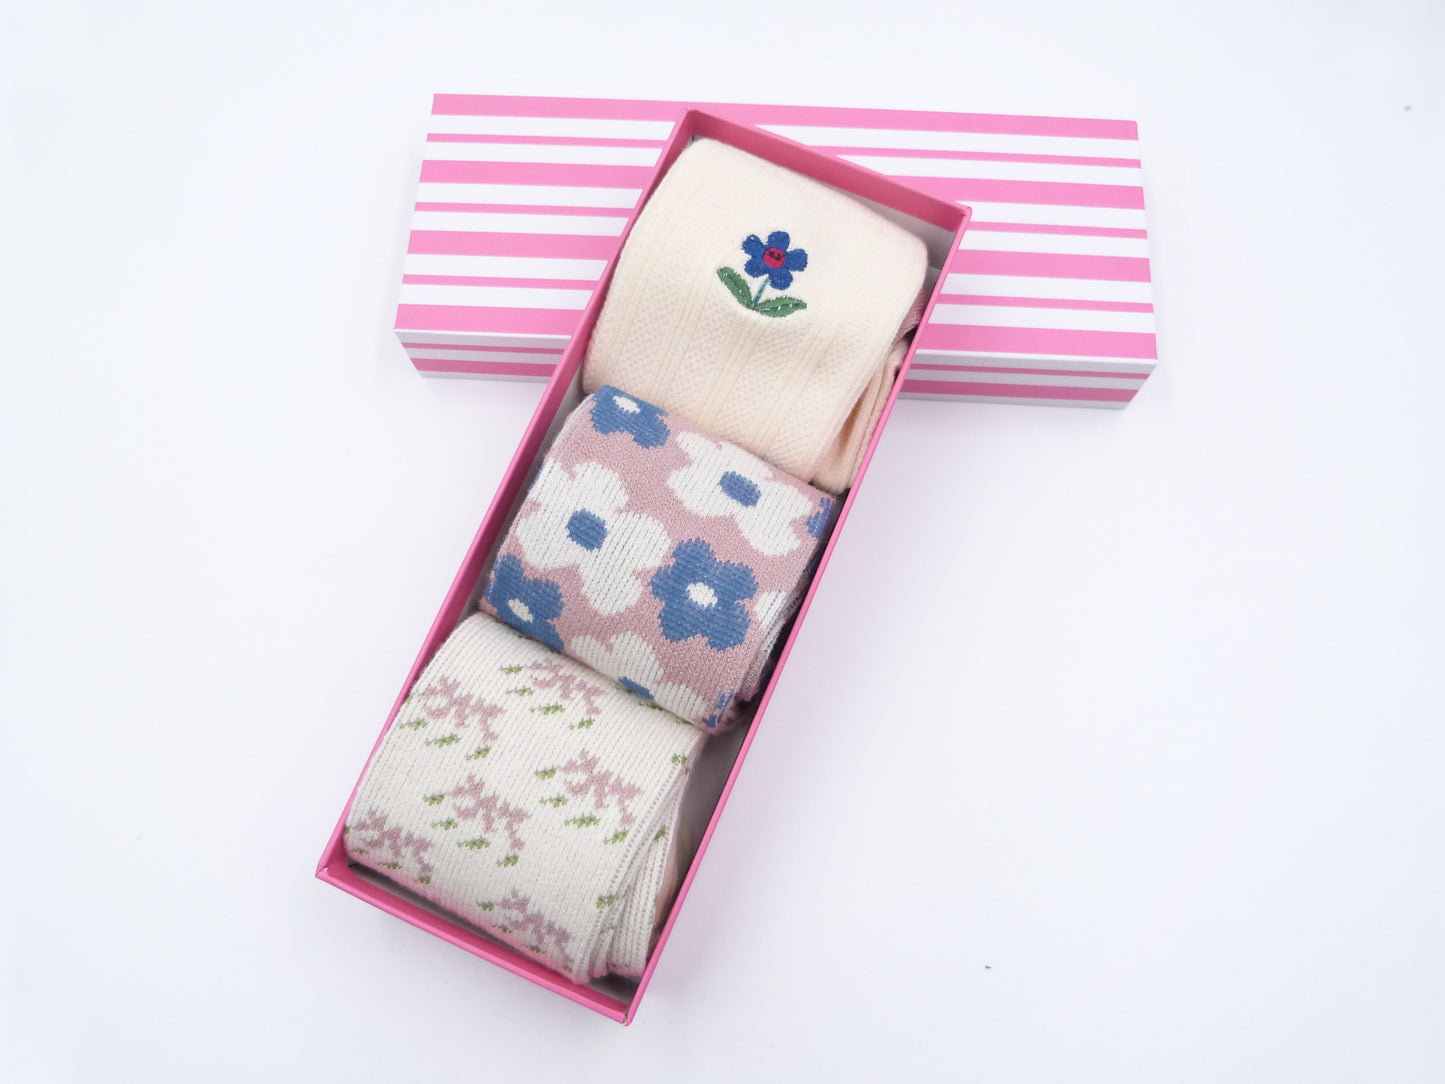 3 Pairs Of Floral Socks With Gift Box